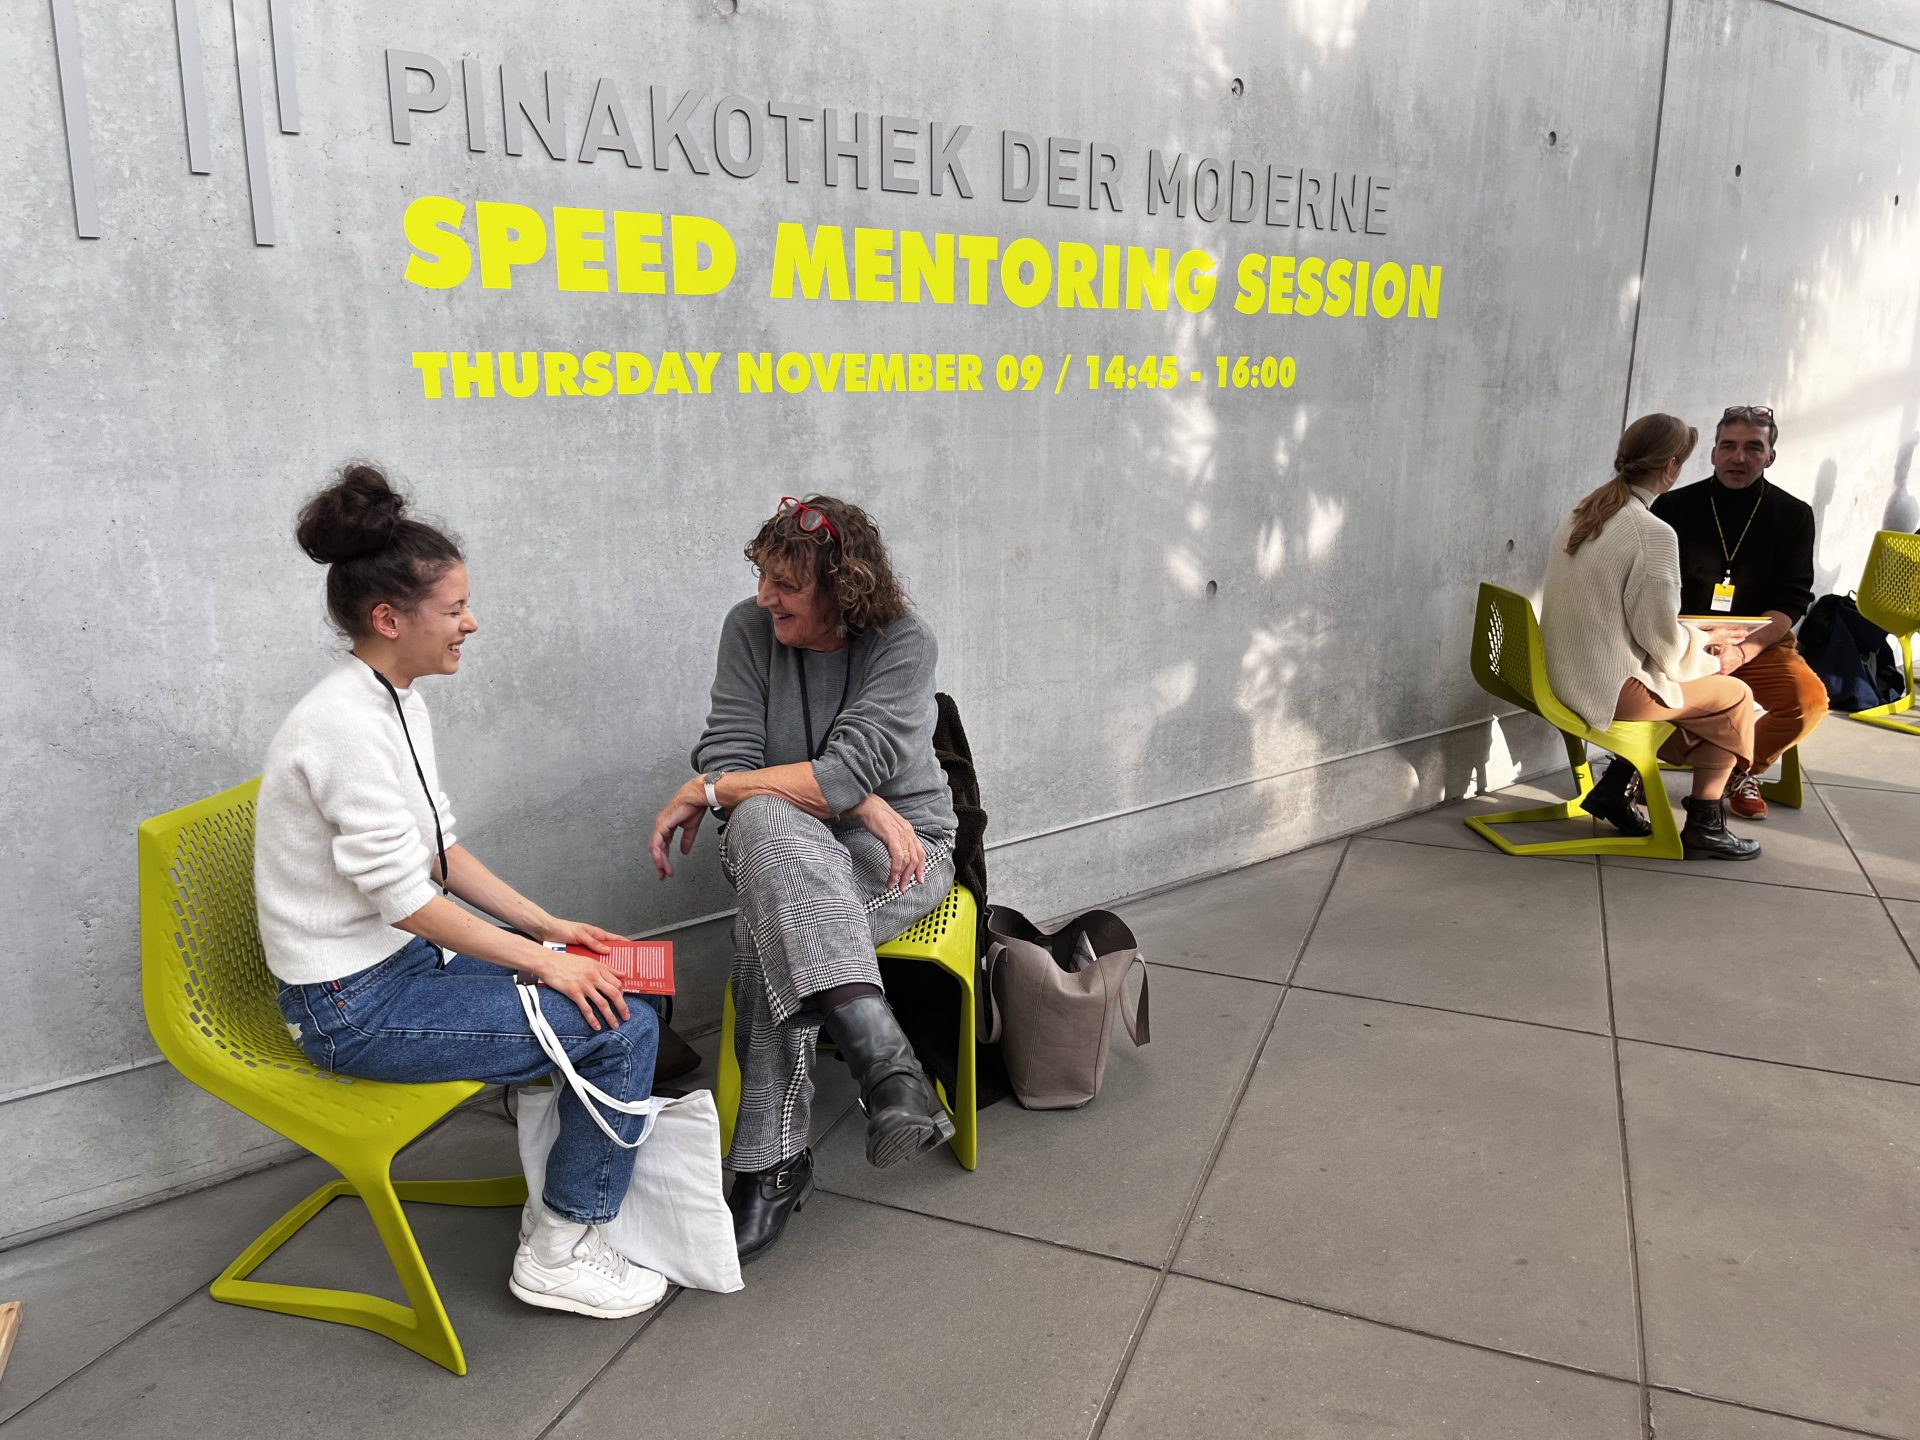 Two participants are chatting on the terrace of the Pinakothek der Moderne. They are sitting on light green chairs. On the concrete wall in the background is the